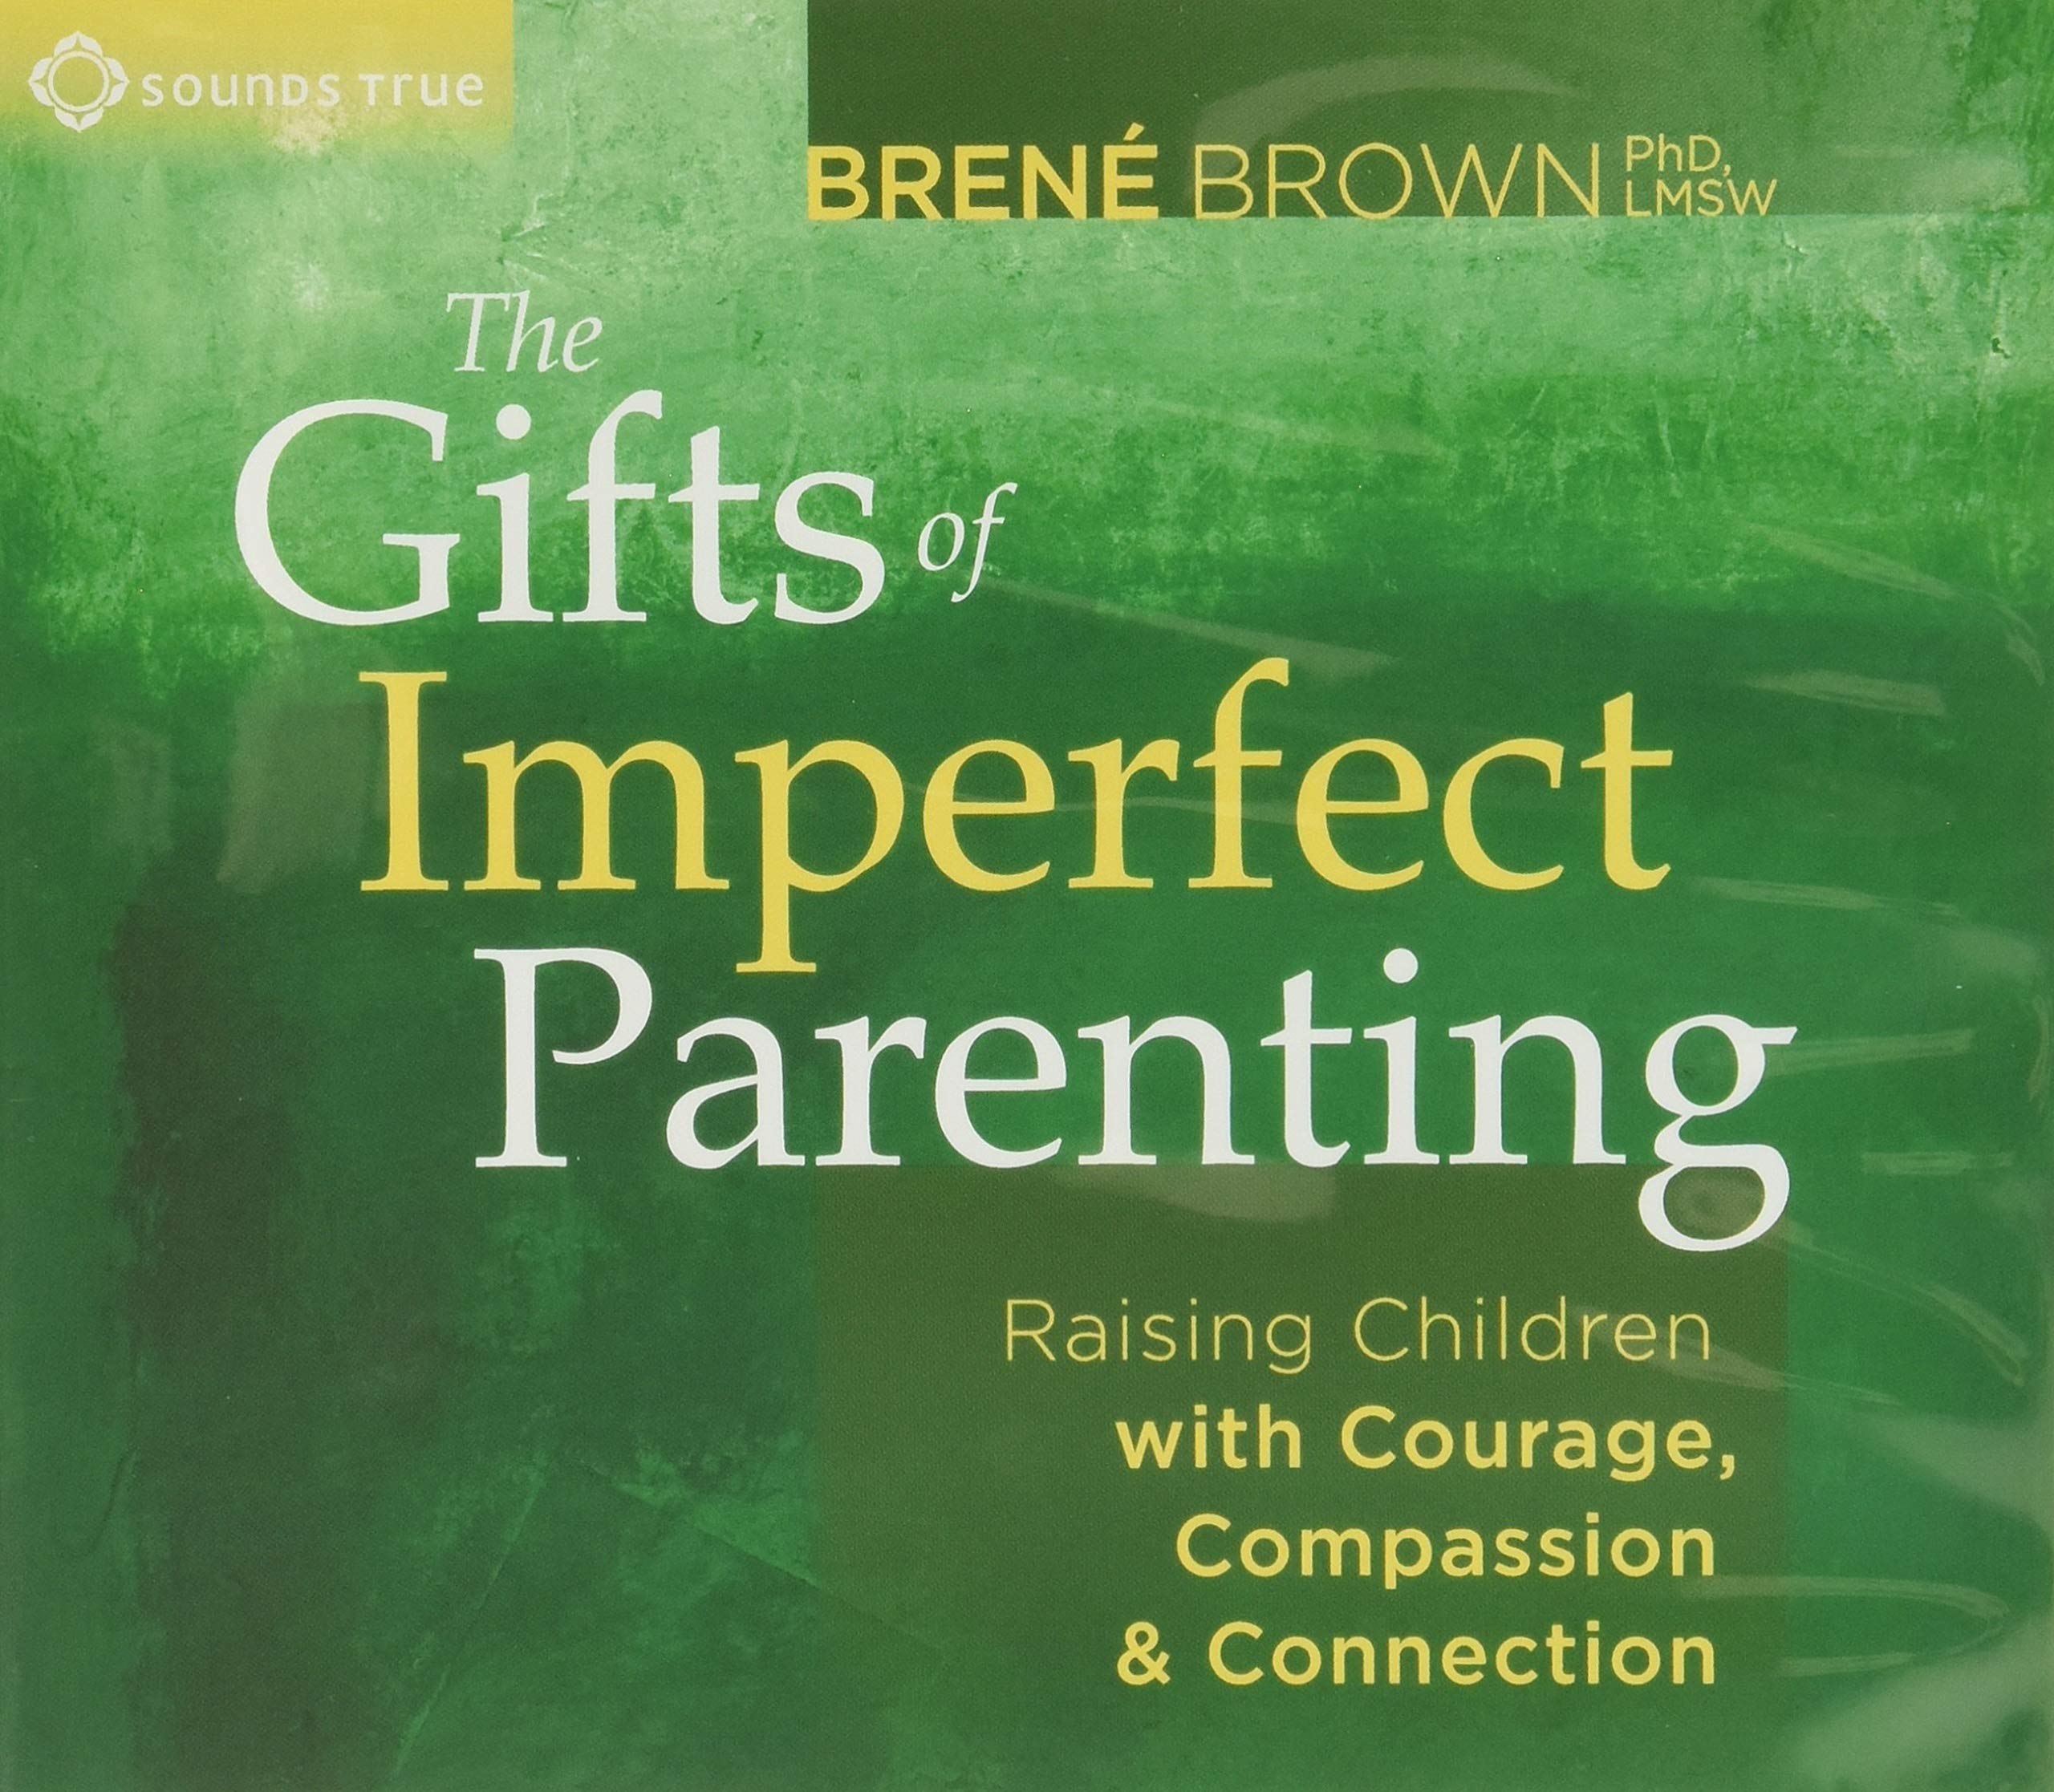 The Gifts of Imperfect Parenting- Raising Children with Courage, Compassion, and Connection